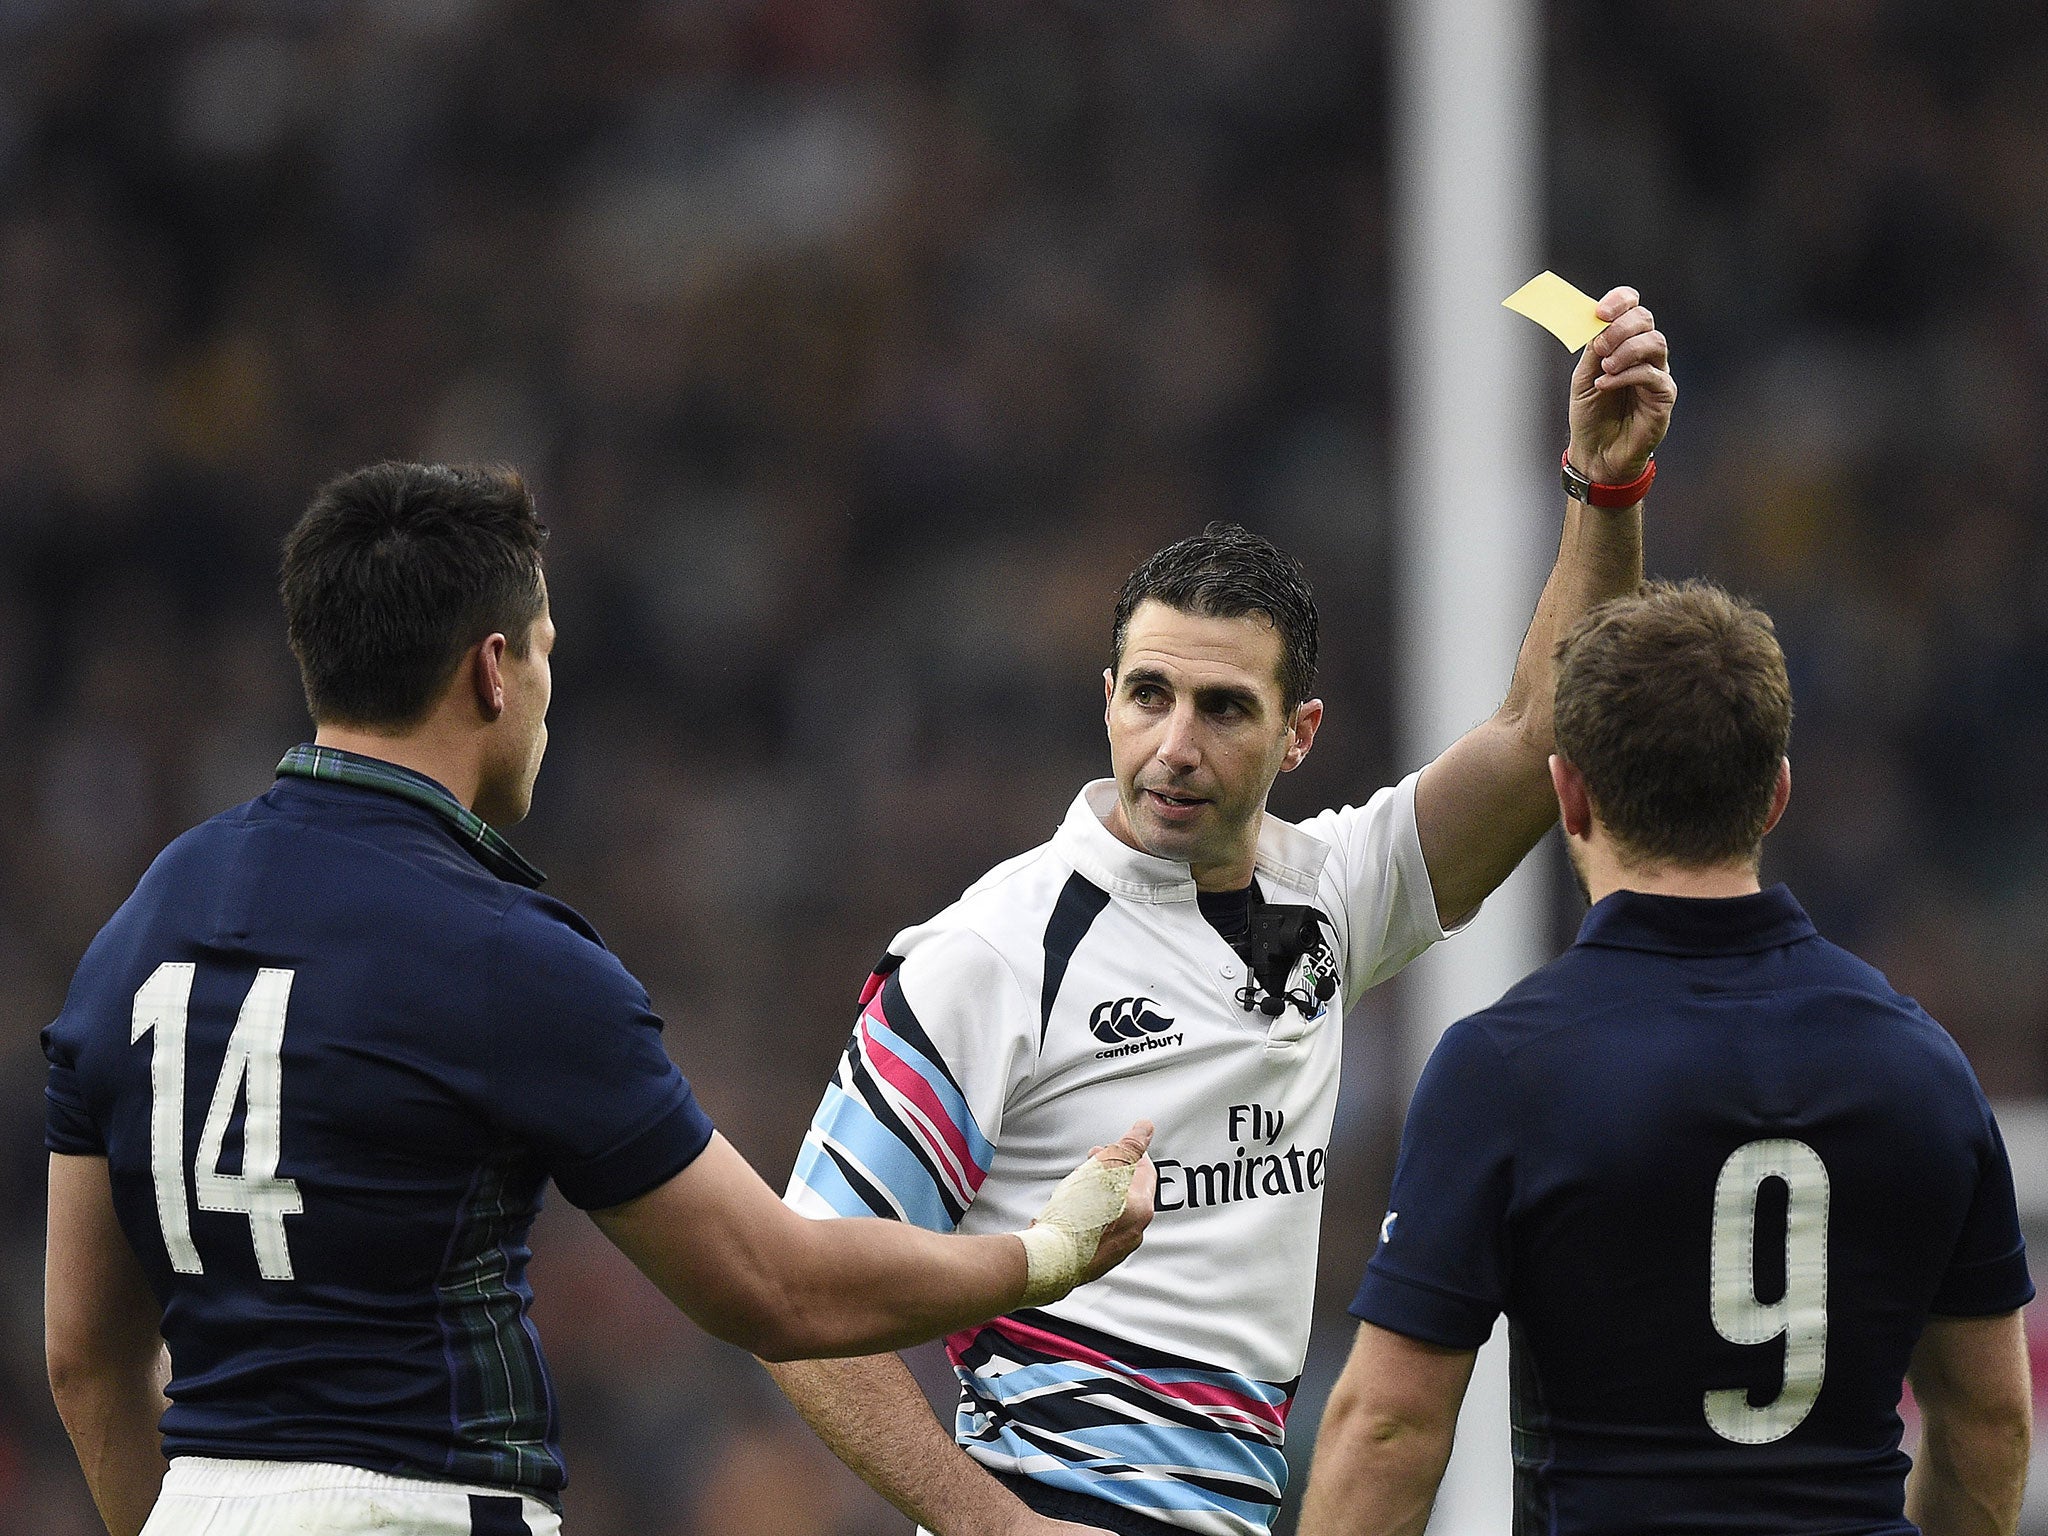 Referee Craig Joubert gives Sean Maitland a yellow card during Scotland's defeat to Australia